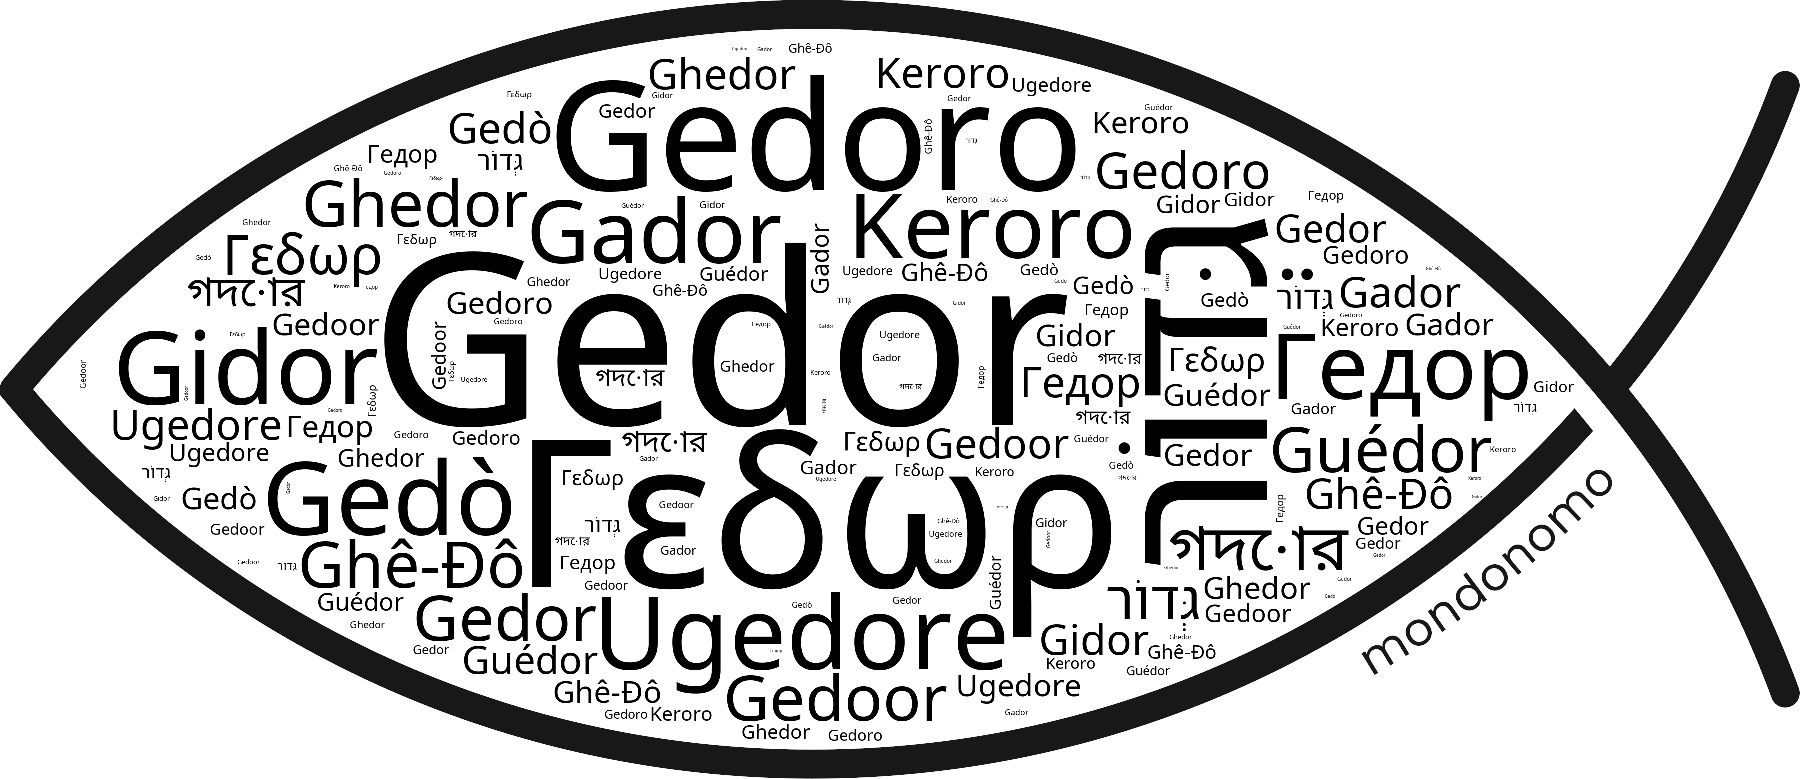 Name Gedor in the world's Bibles